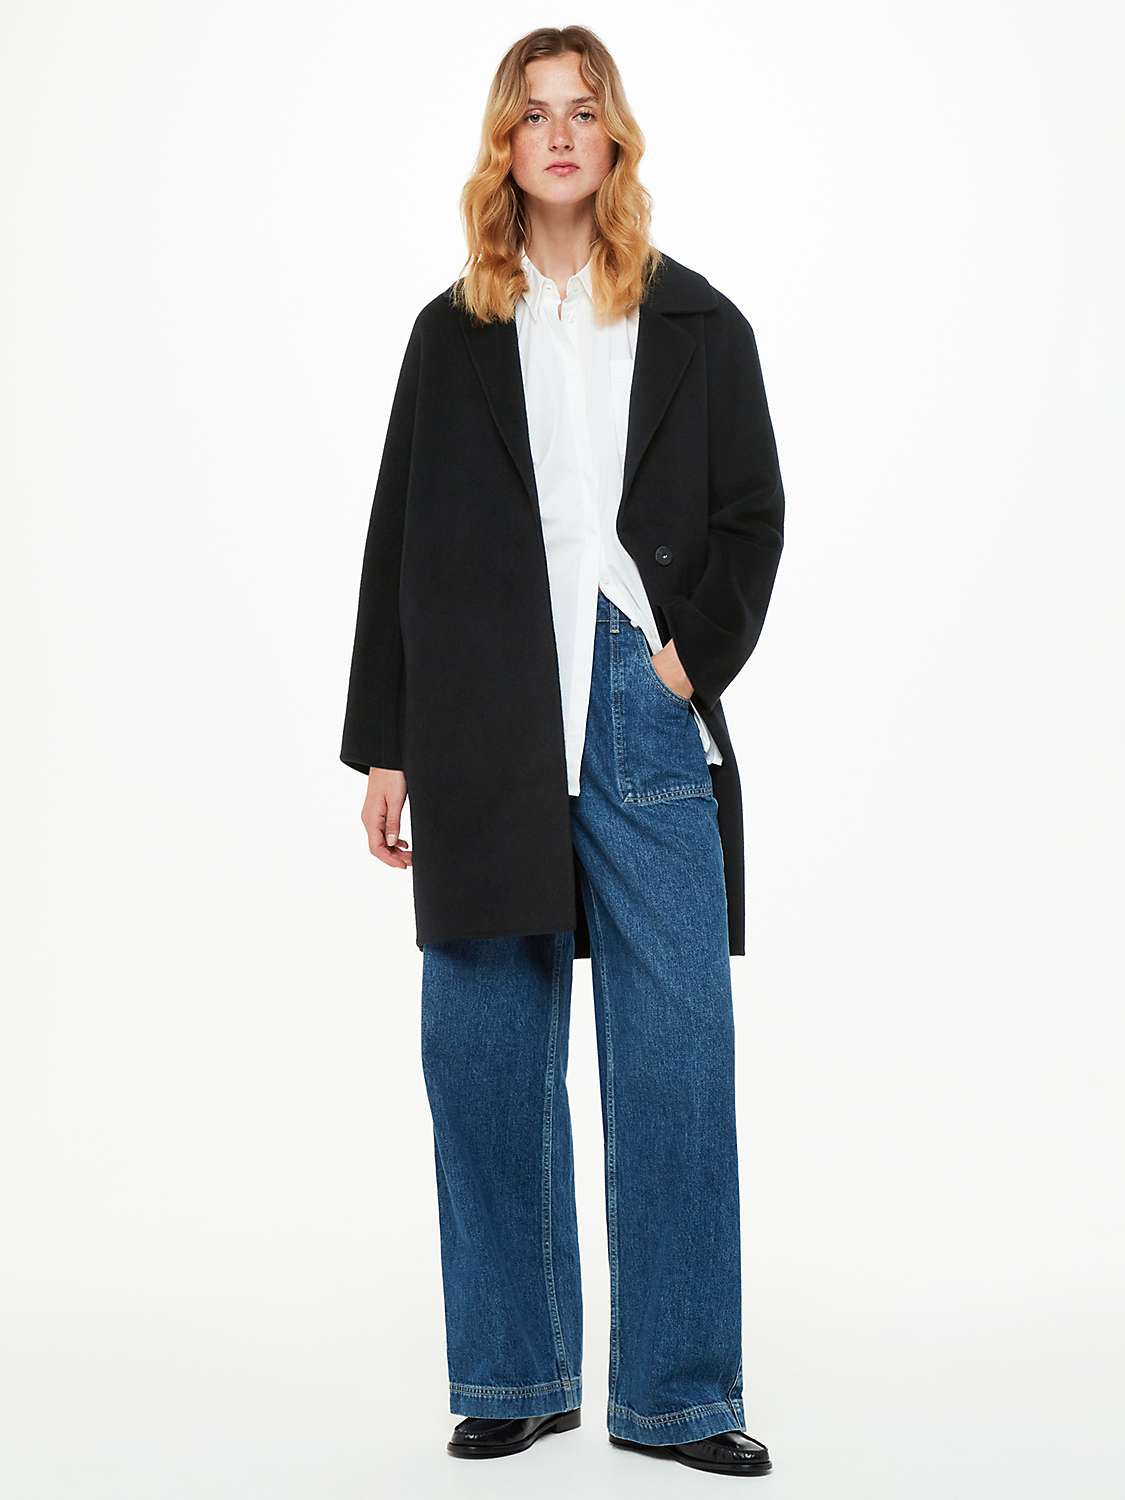 Buy Whistles Double Faced Wool Blend Coat, Black Online at johnlewis.com